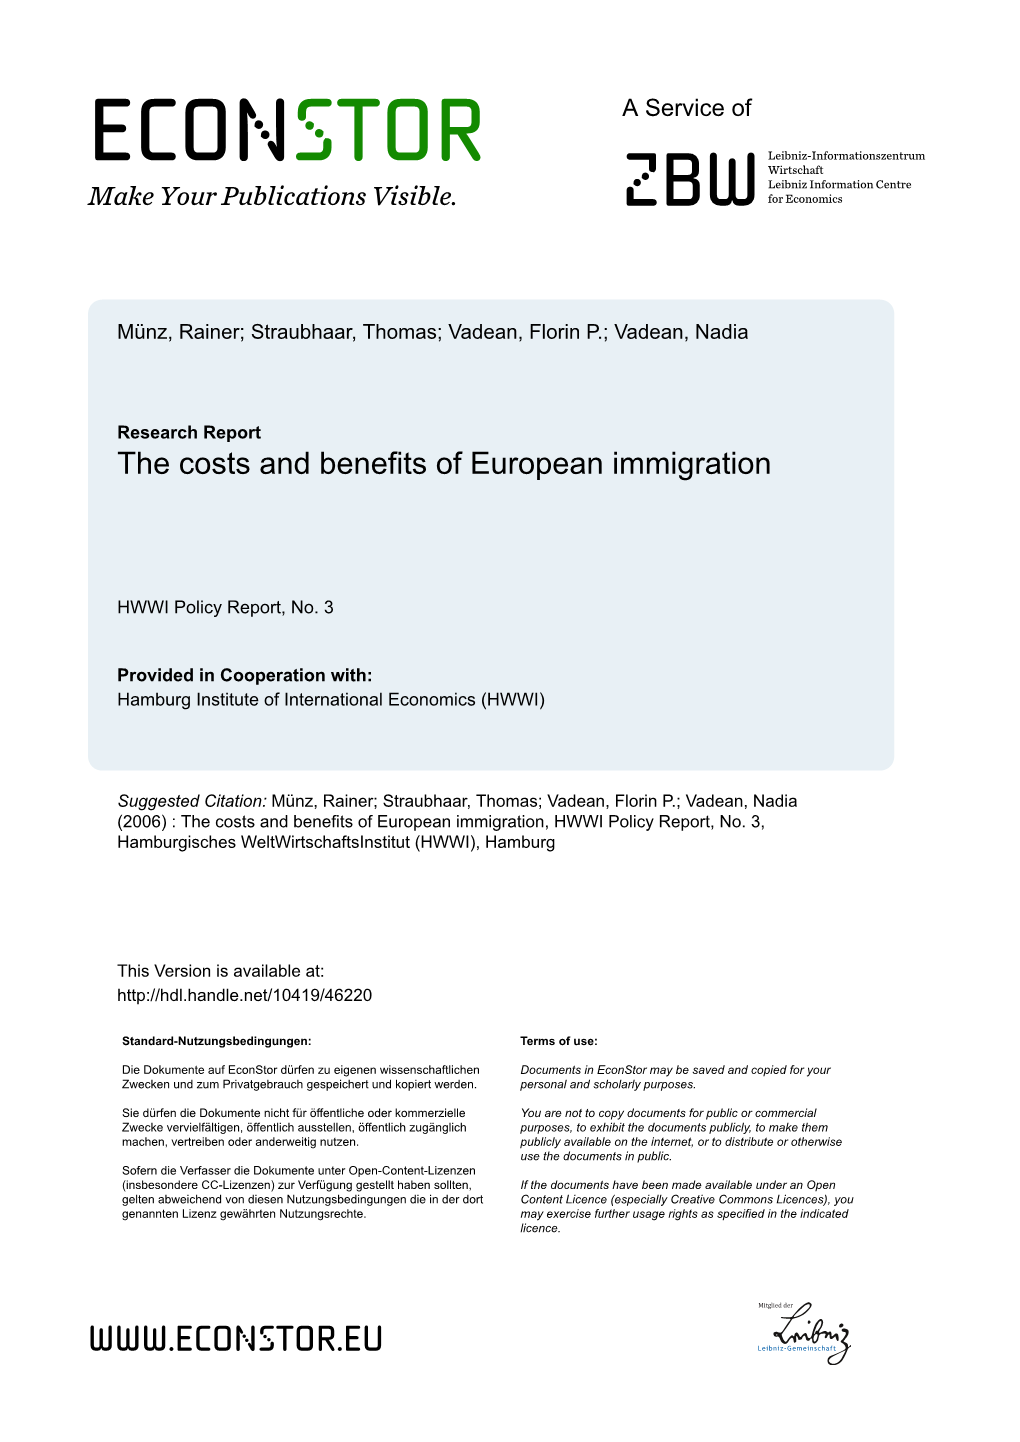 The Costs and Benefits of European Immigration